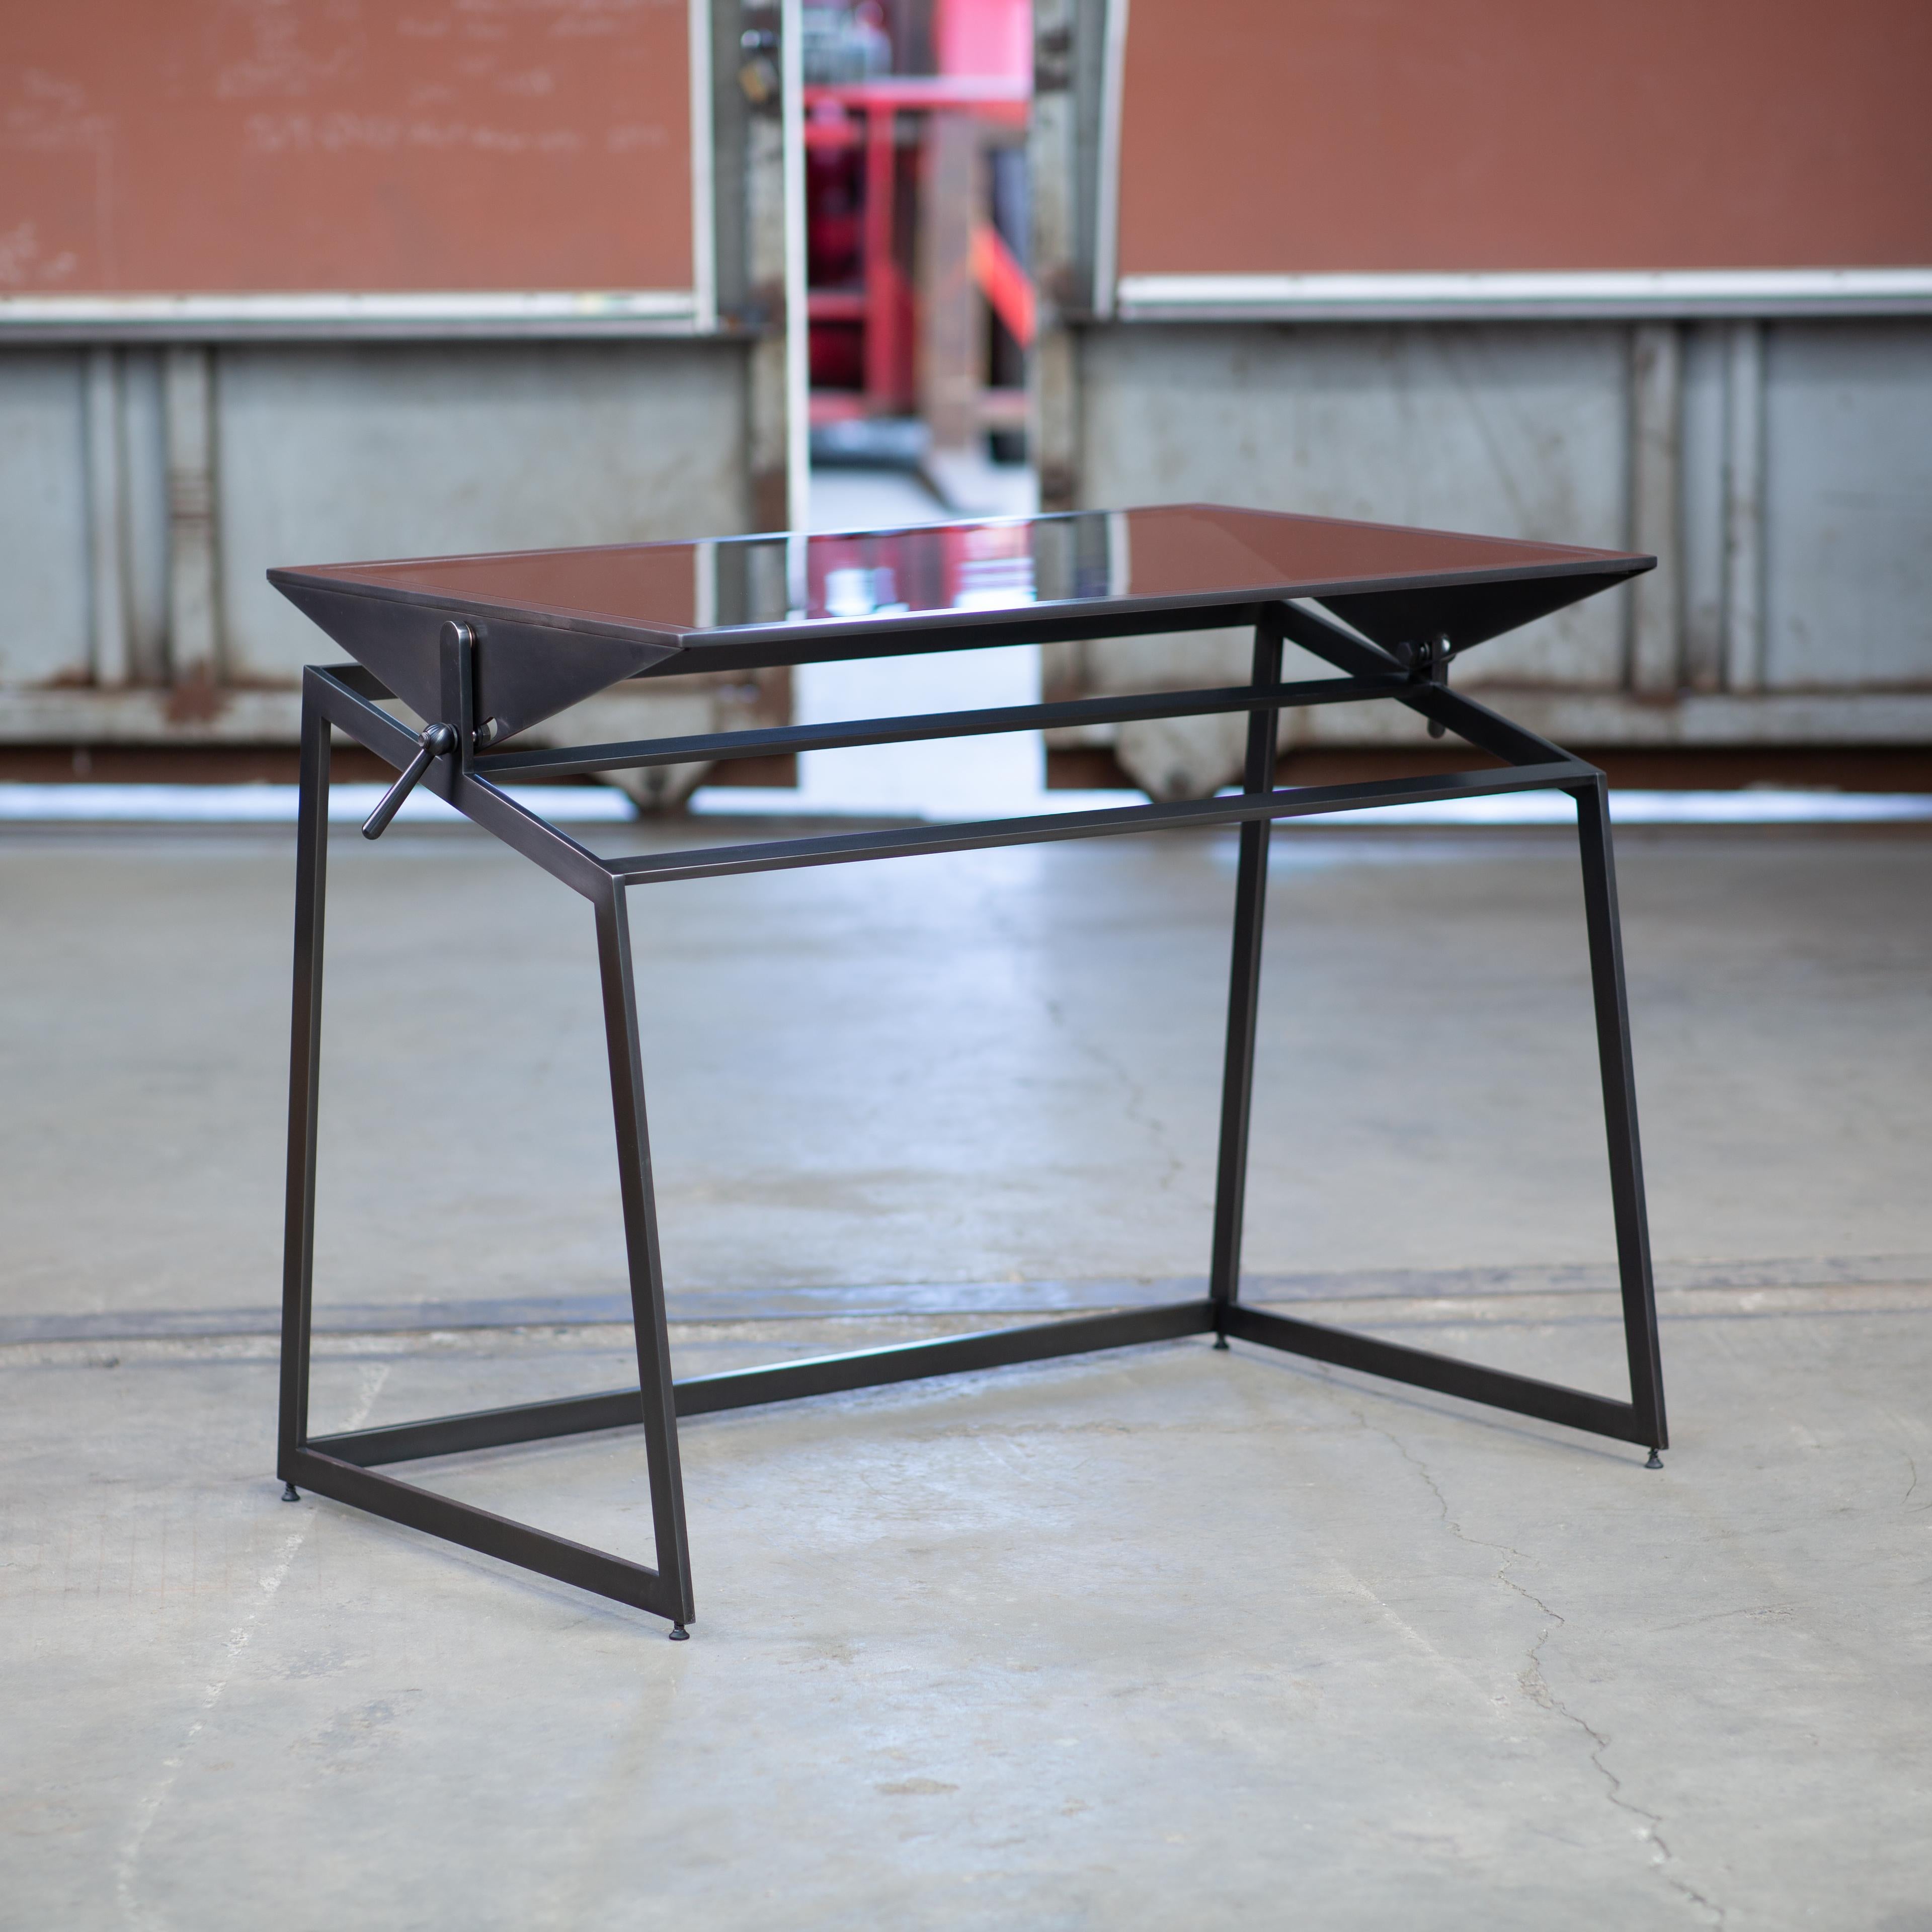 Designed and made-to-order in our Seattle studio with artists, architects, drafters, designers and creatives in mind, the Pivoting Drafting Table is modern, minimal and sleek. It features a satin black oxide steel framework with a tempered gray